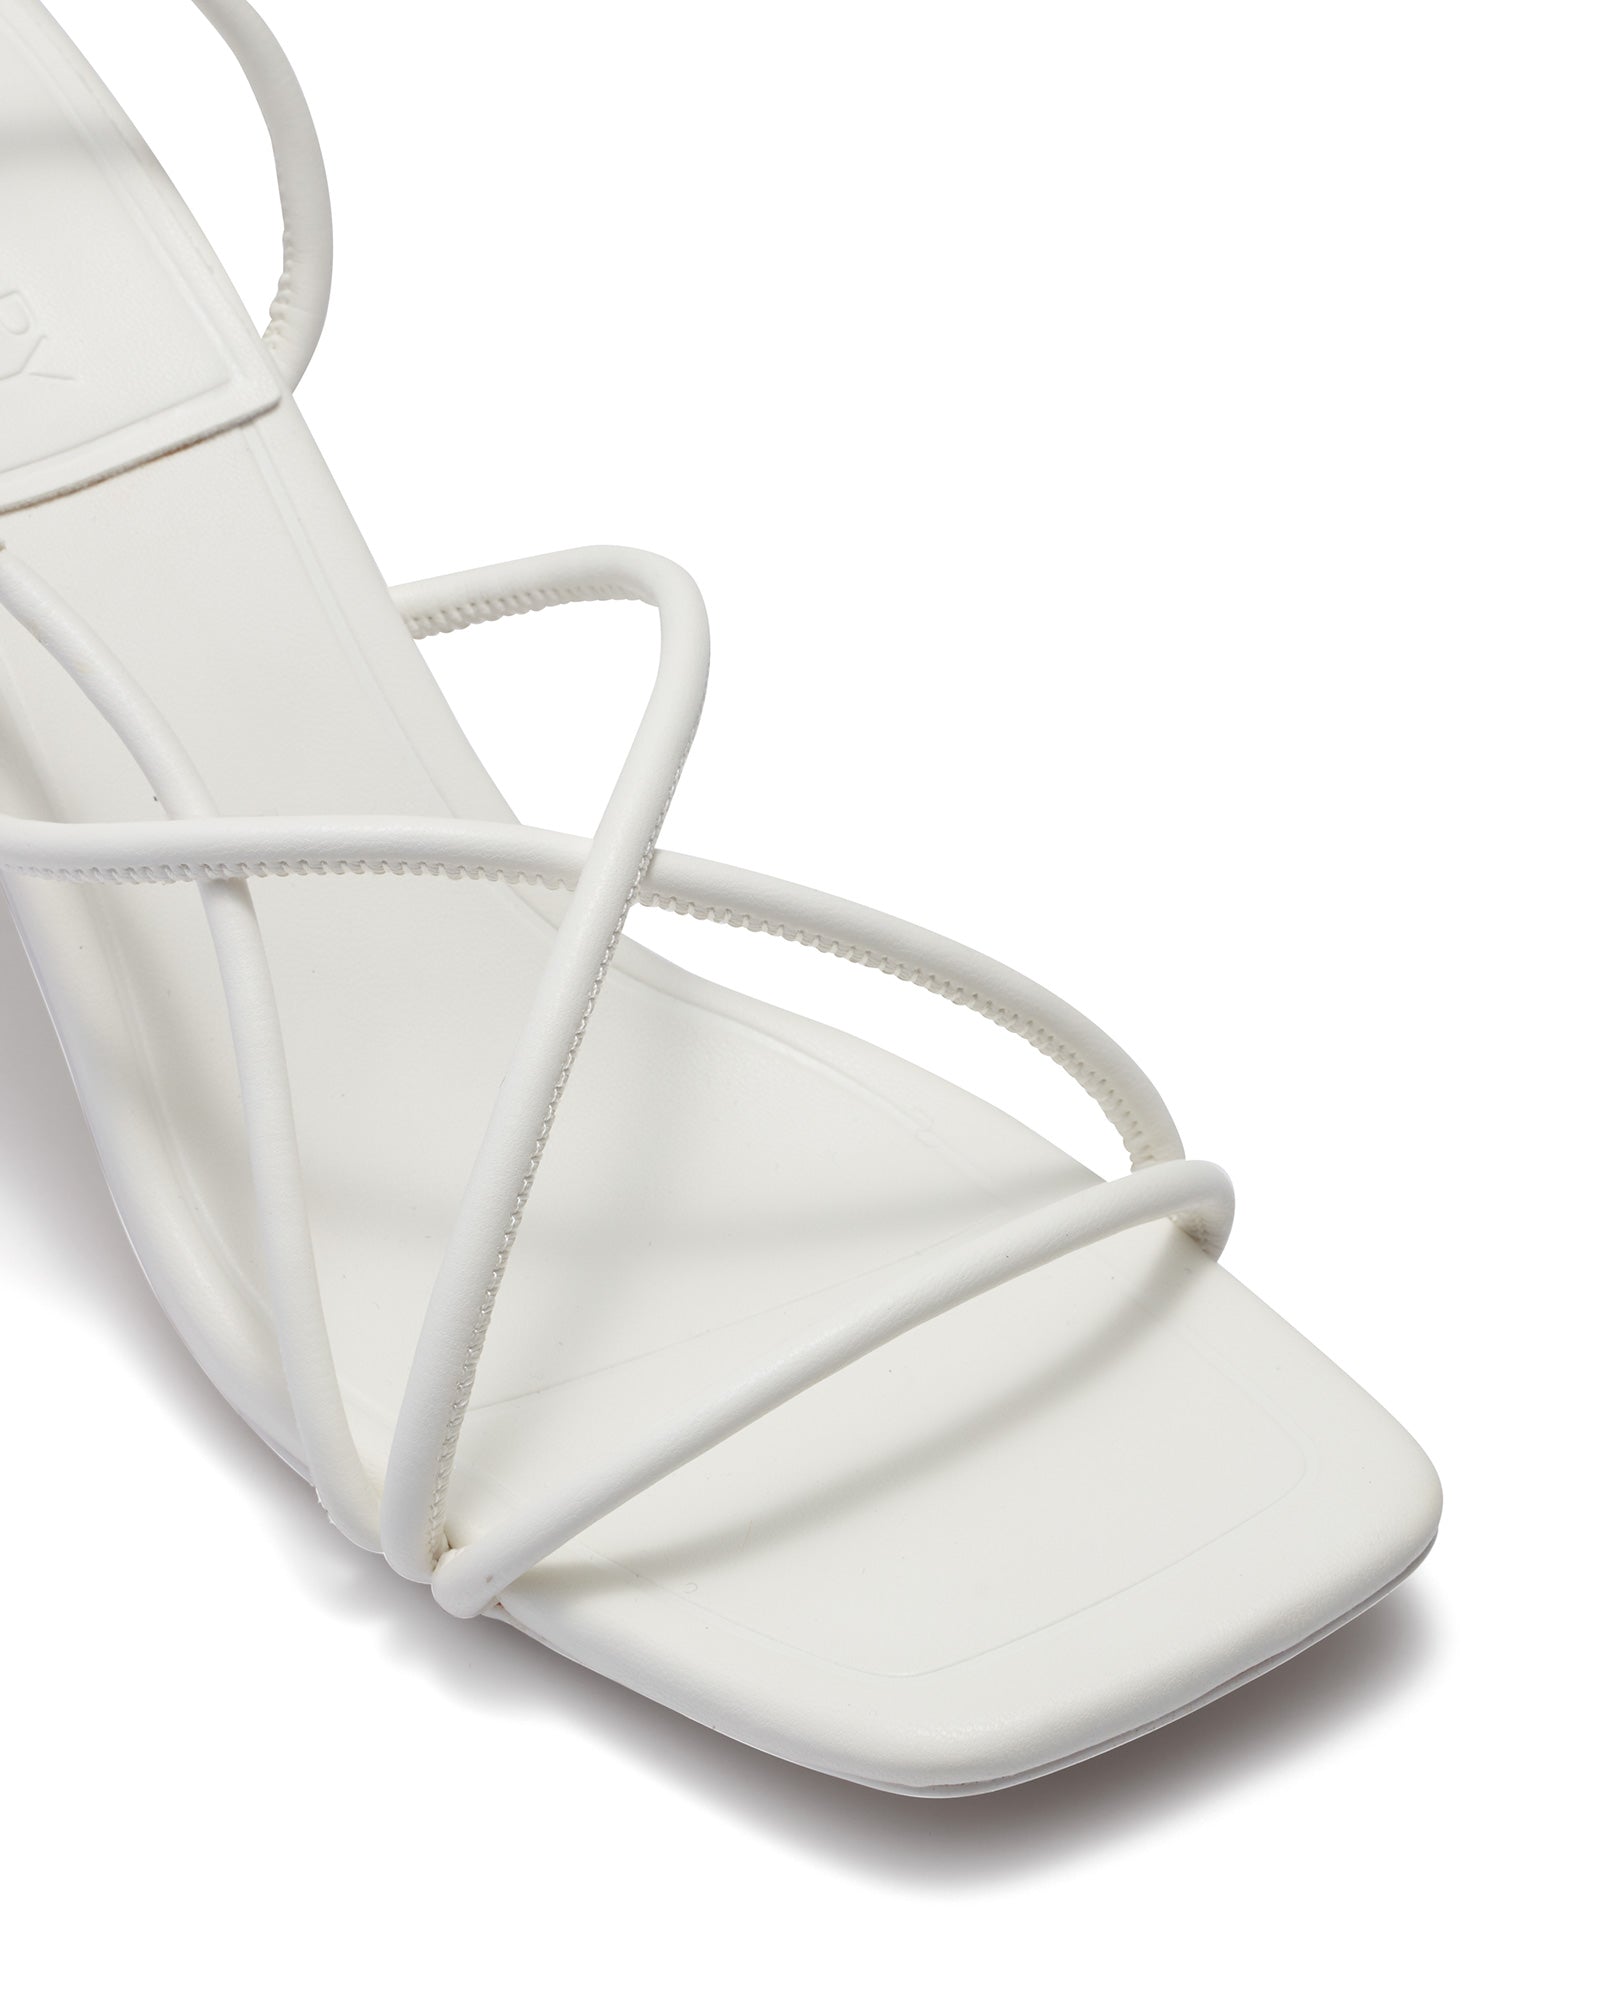 Therapy Shoes Divide White | Women's Heels | Sandals | Stiletto | Strappy